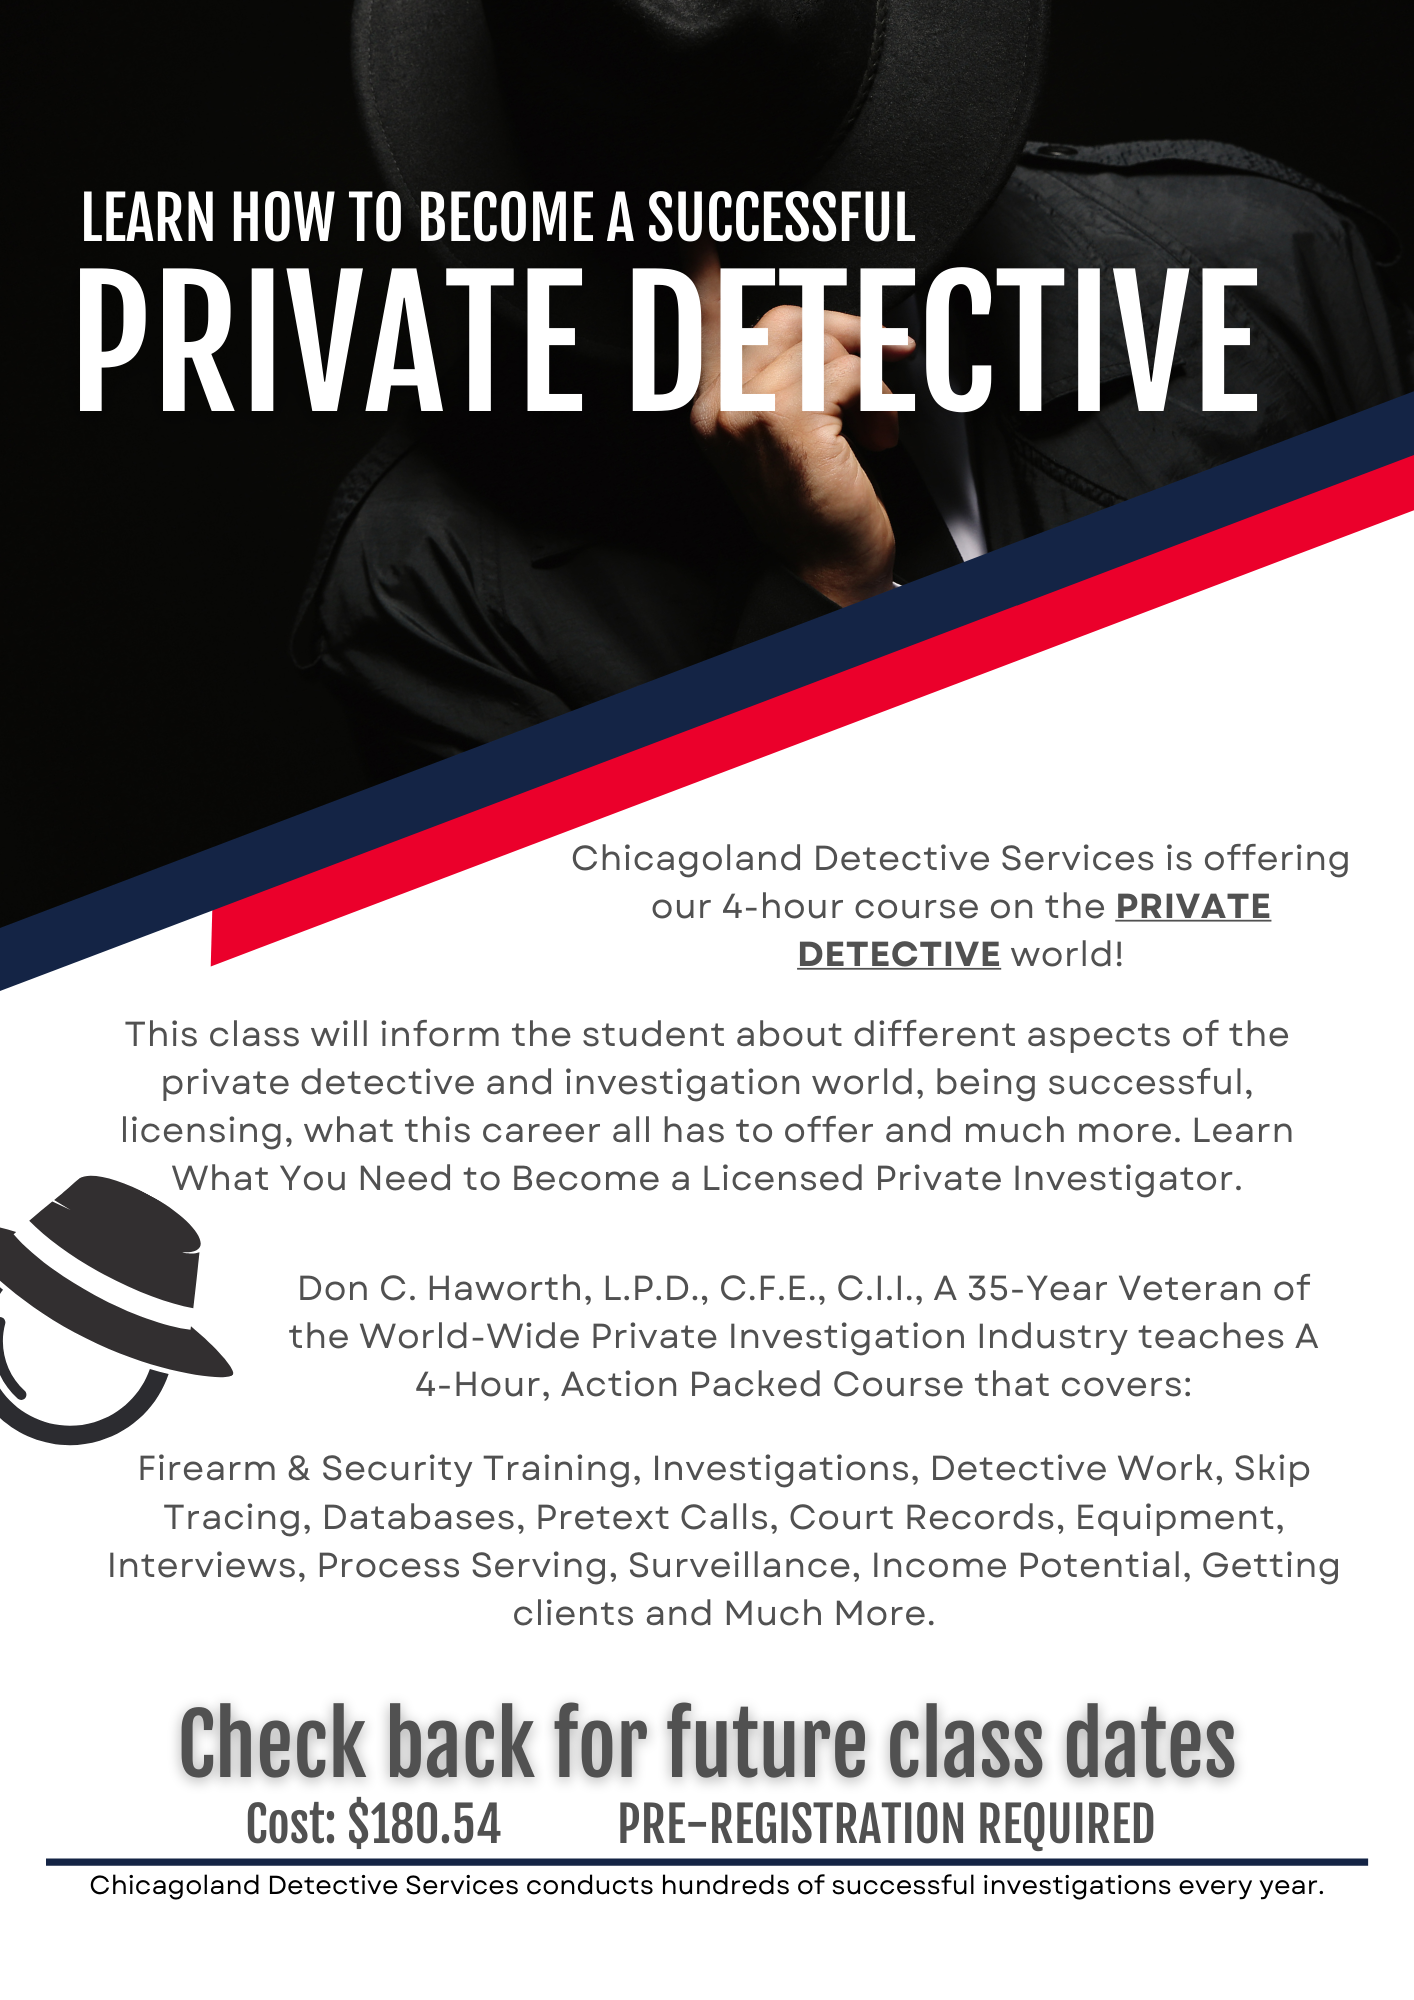 a flyer for asp baton and handcuff certification costs $ 225.00